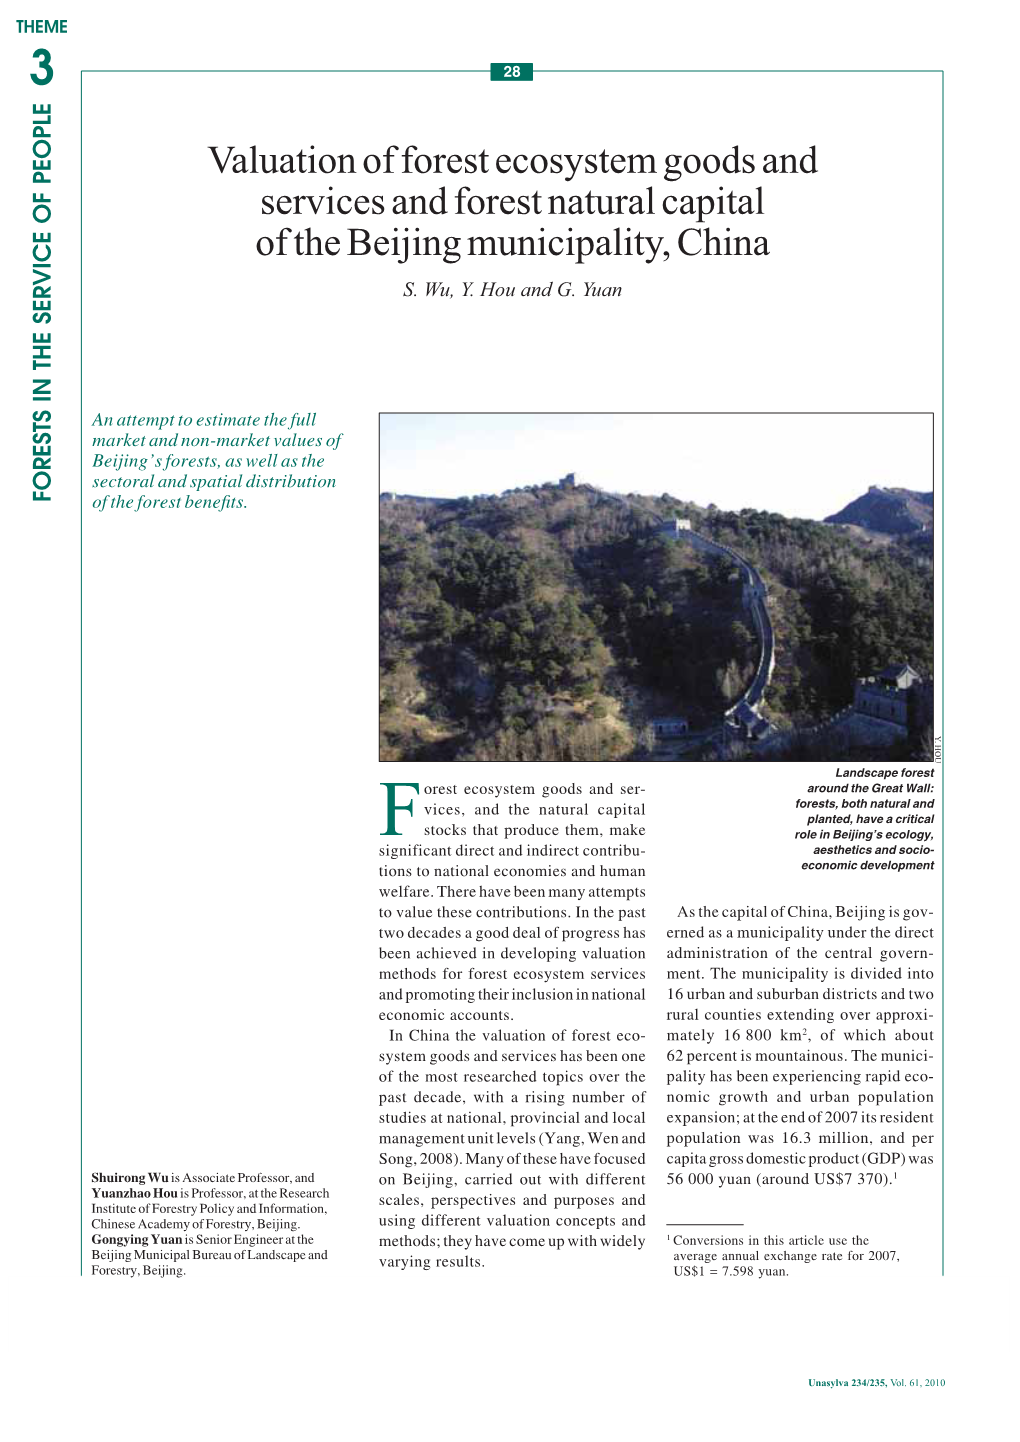 Valuation of Forest Ecosystem Goods and Services and Forest Natural Capital of the Beijing Municipality, China S